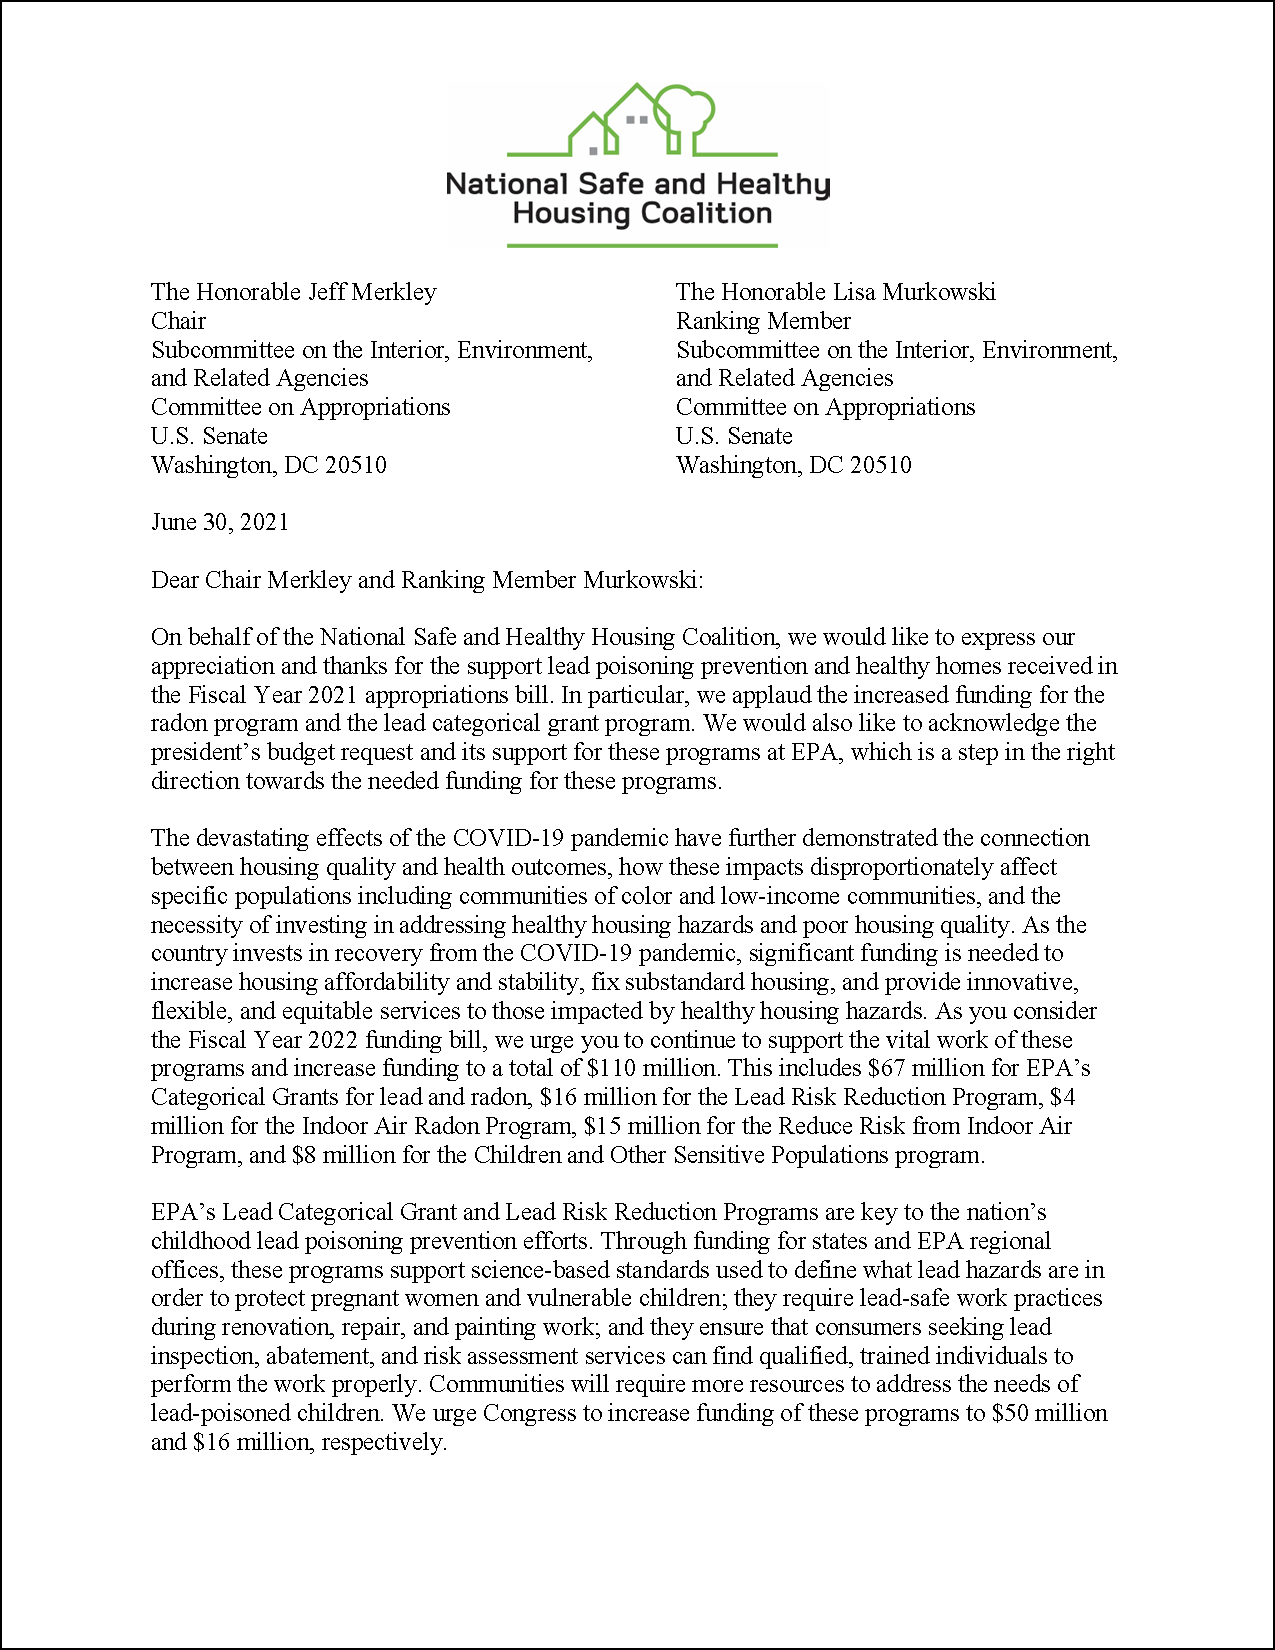 Letter: FY22 Appropriations to U.S. Senate: EPA Programs [2021.06.30] [NSHHC]